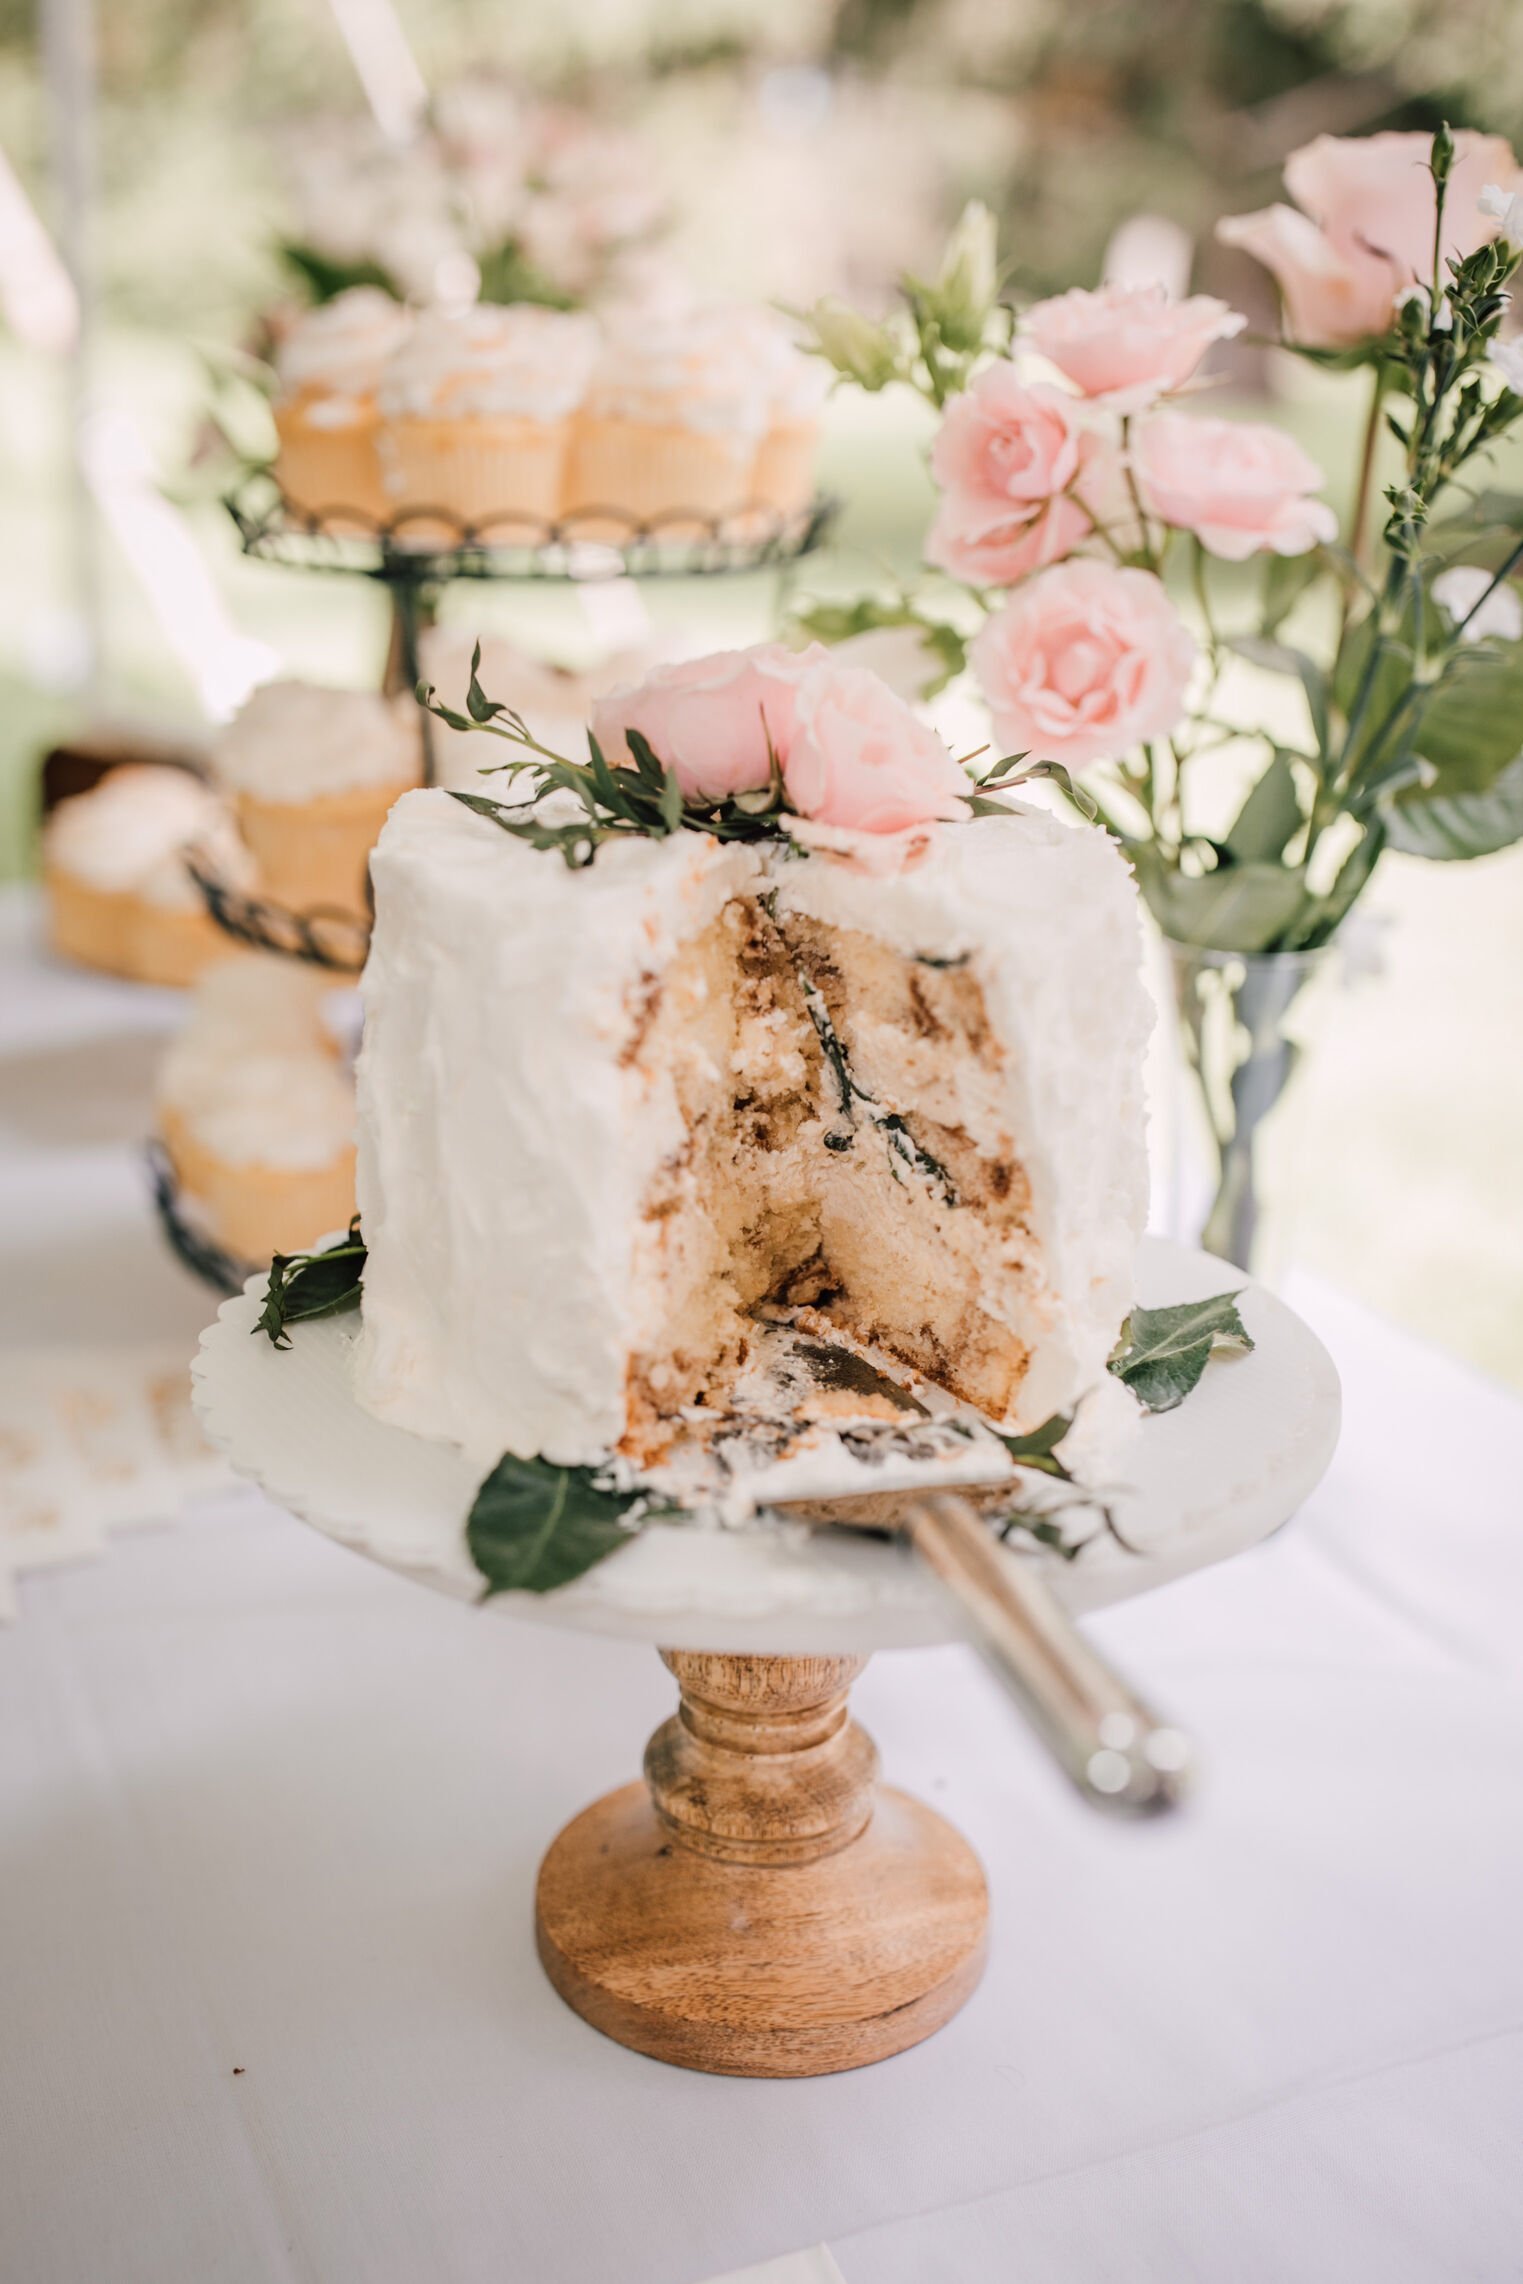  cut wedding cake from an outdoor wedding ny 